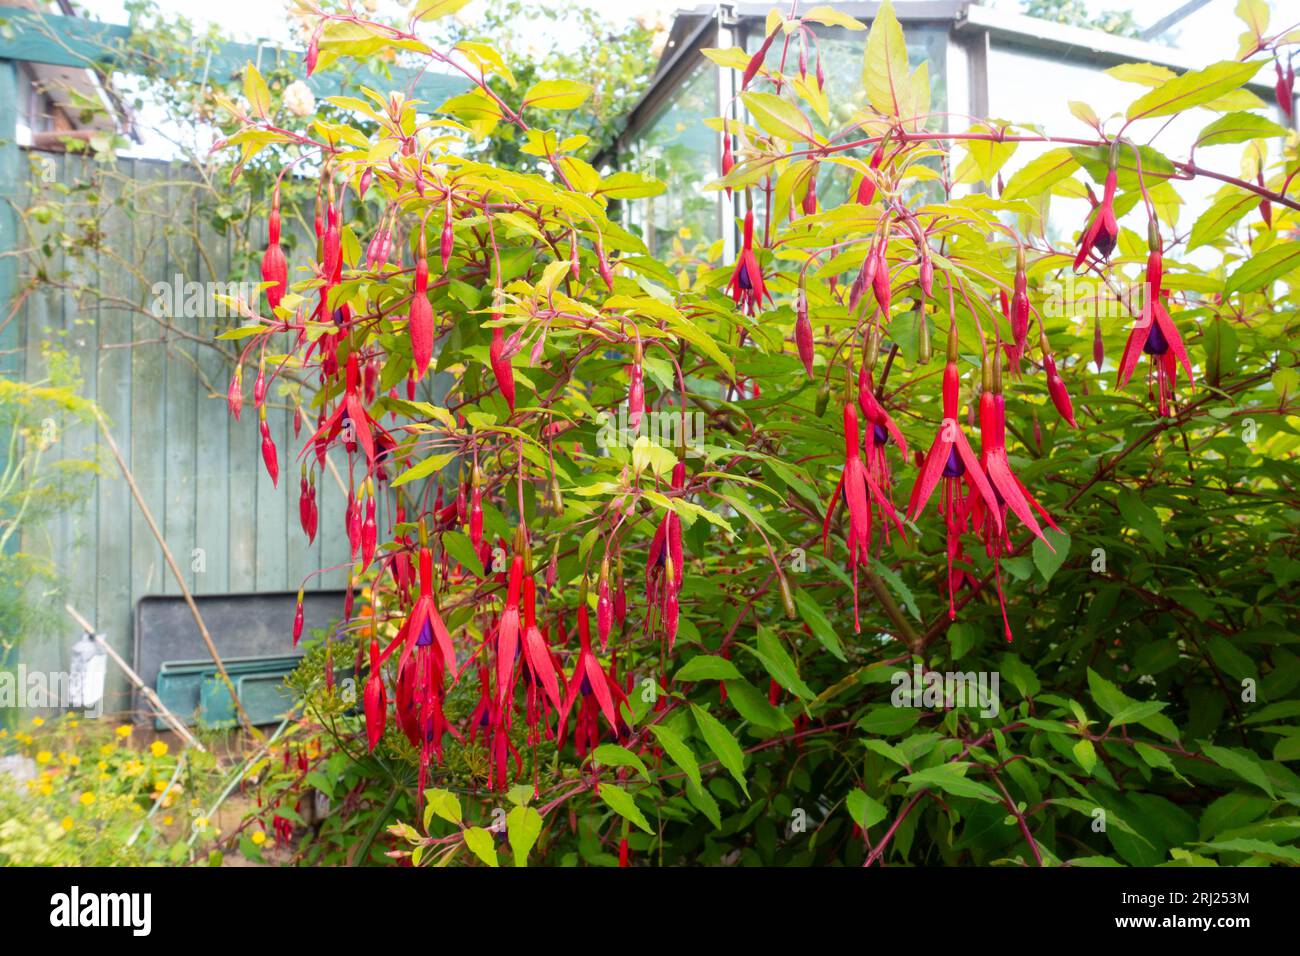 A fuchsia plant flowering with many brightly coloured flowers. Stock Photo